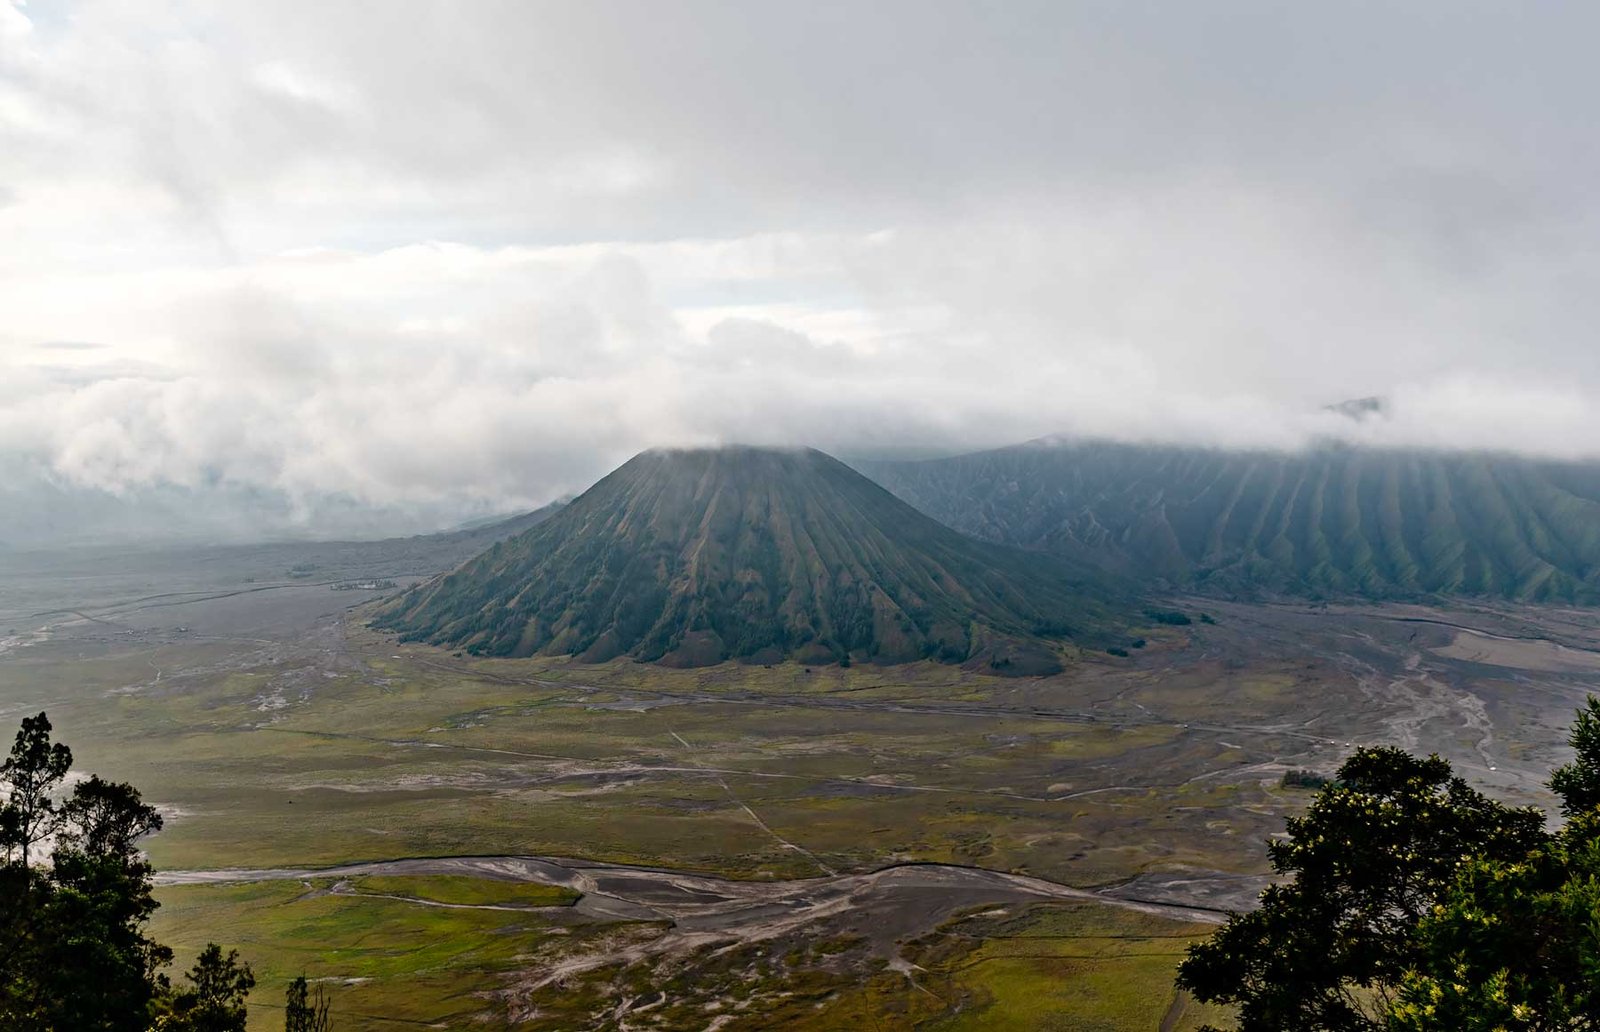 Mount Batok. Read the review of my Mount Bromo Tour: Climbing an active volcano in East Java, Indonesia on Urban Pixxels.